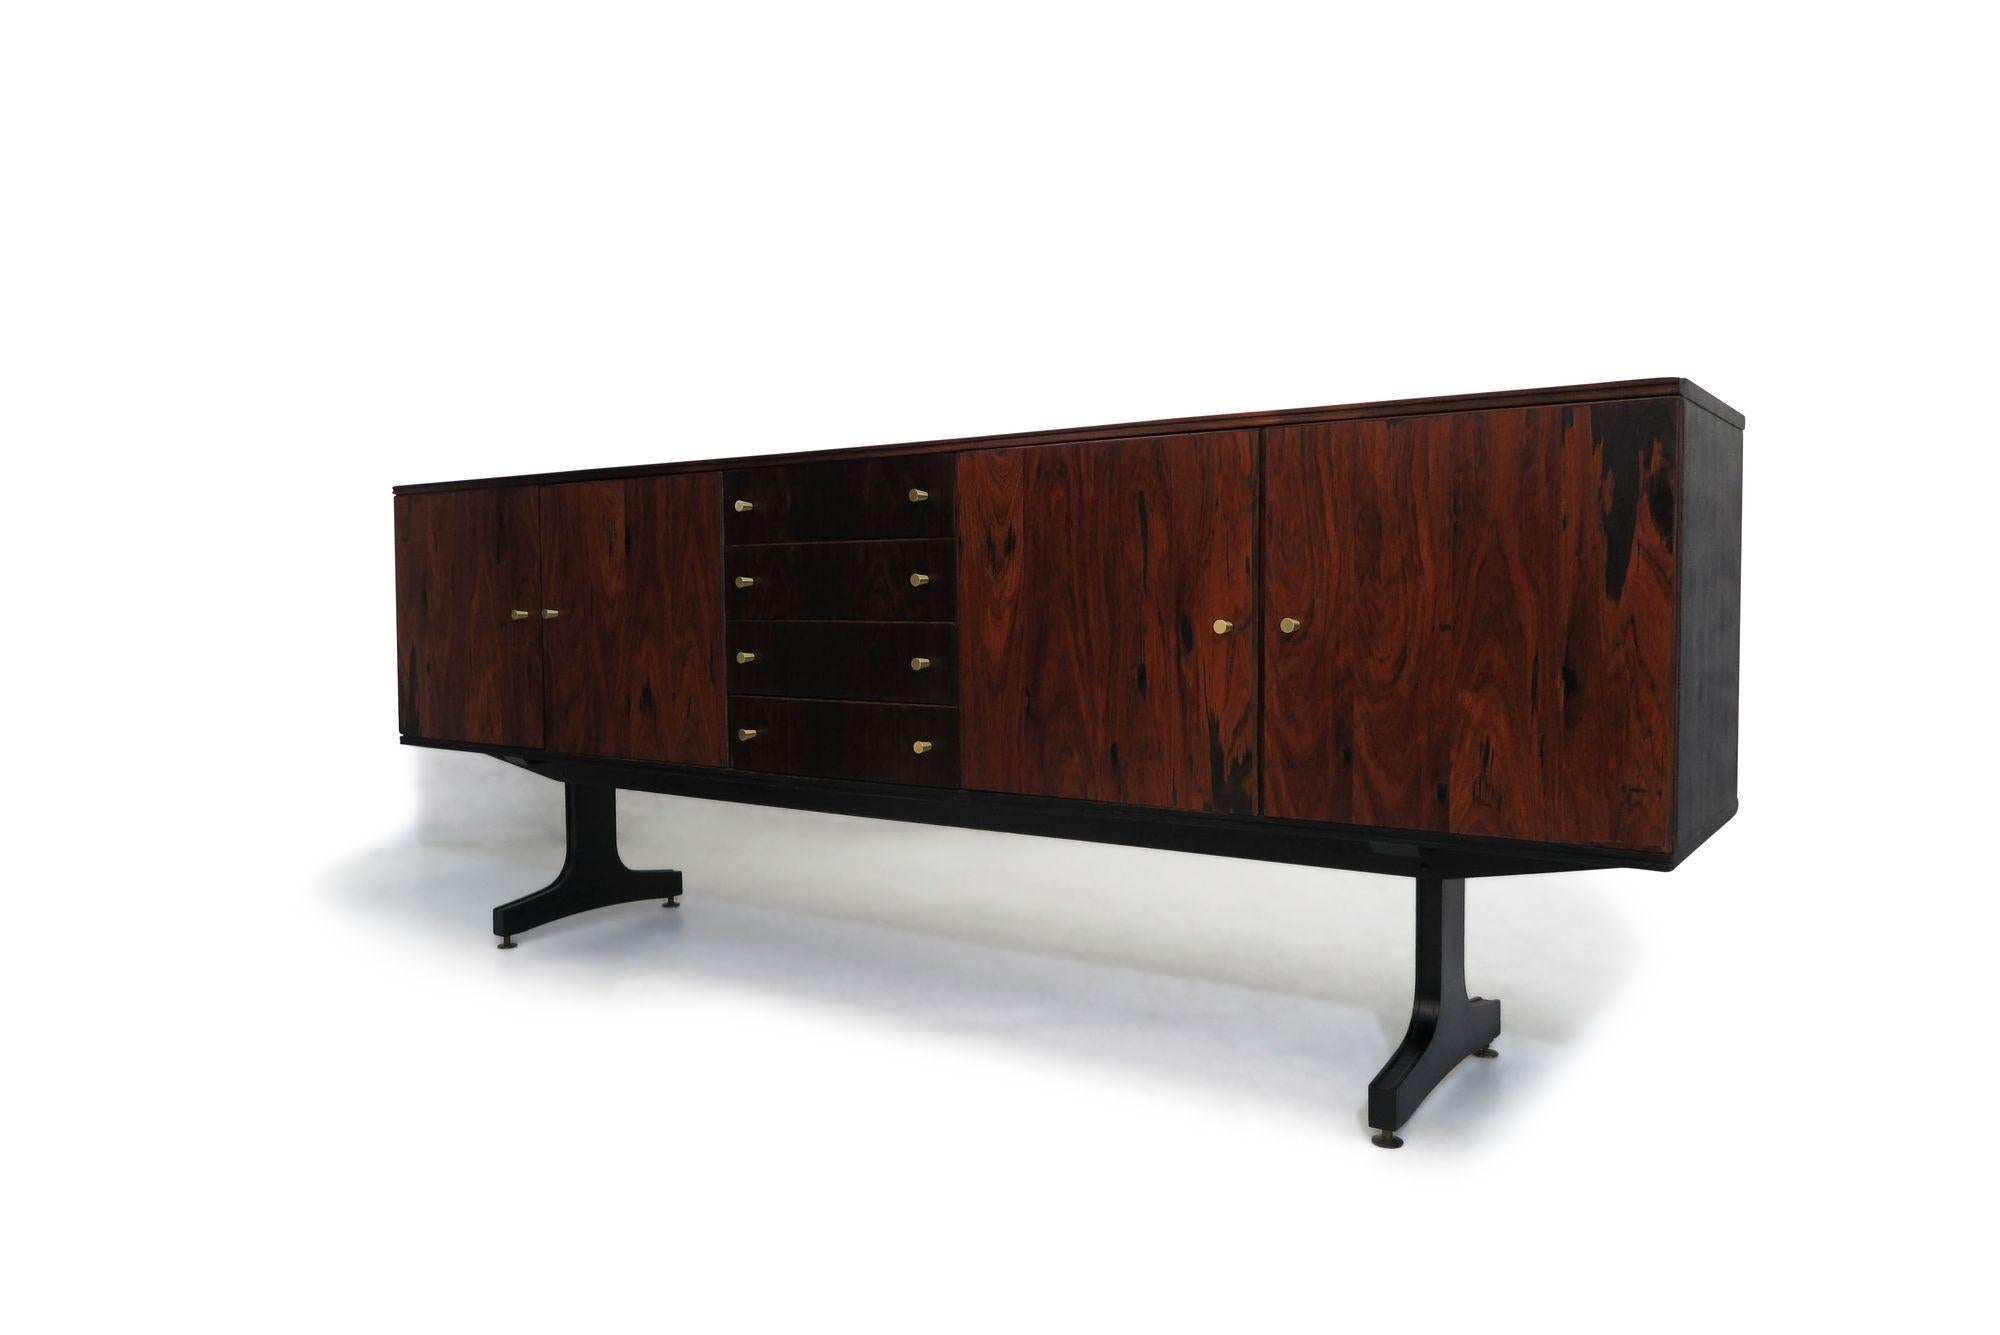 Movies Cimo, Brazilian Credenza, 1960, crafted of rosewood with four doors, and series of four drawers in center with brass pulls opening to reveal an interior of Pau Marfim wood. Painted black side panels and raised on trestle legs. Good vintage